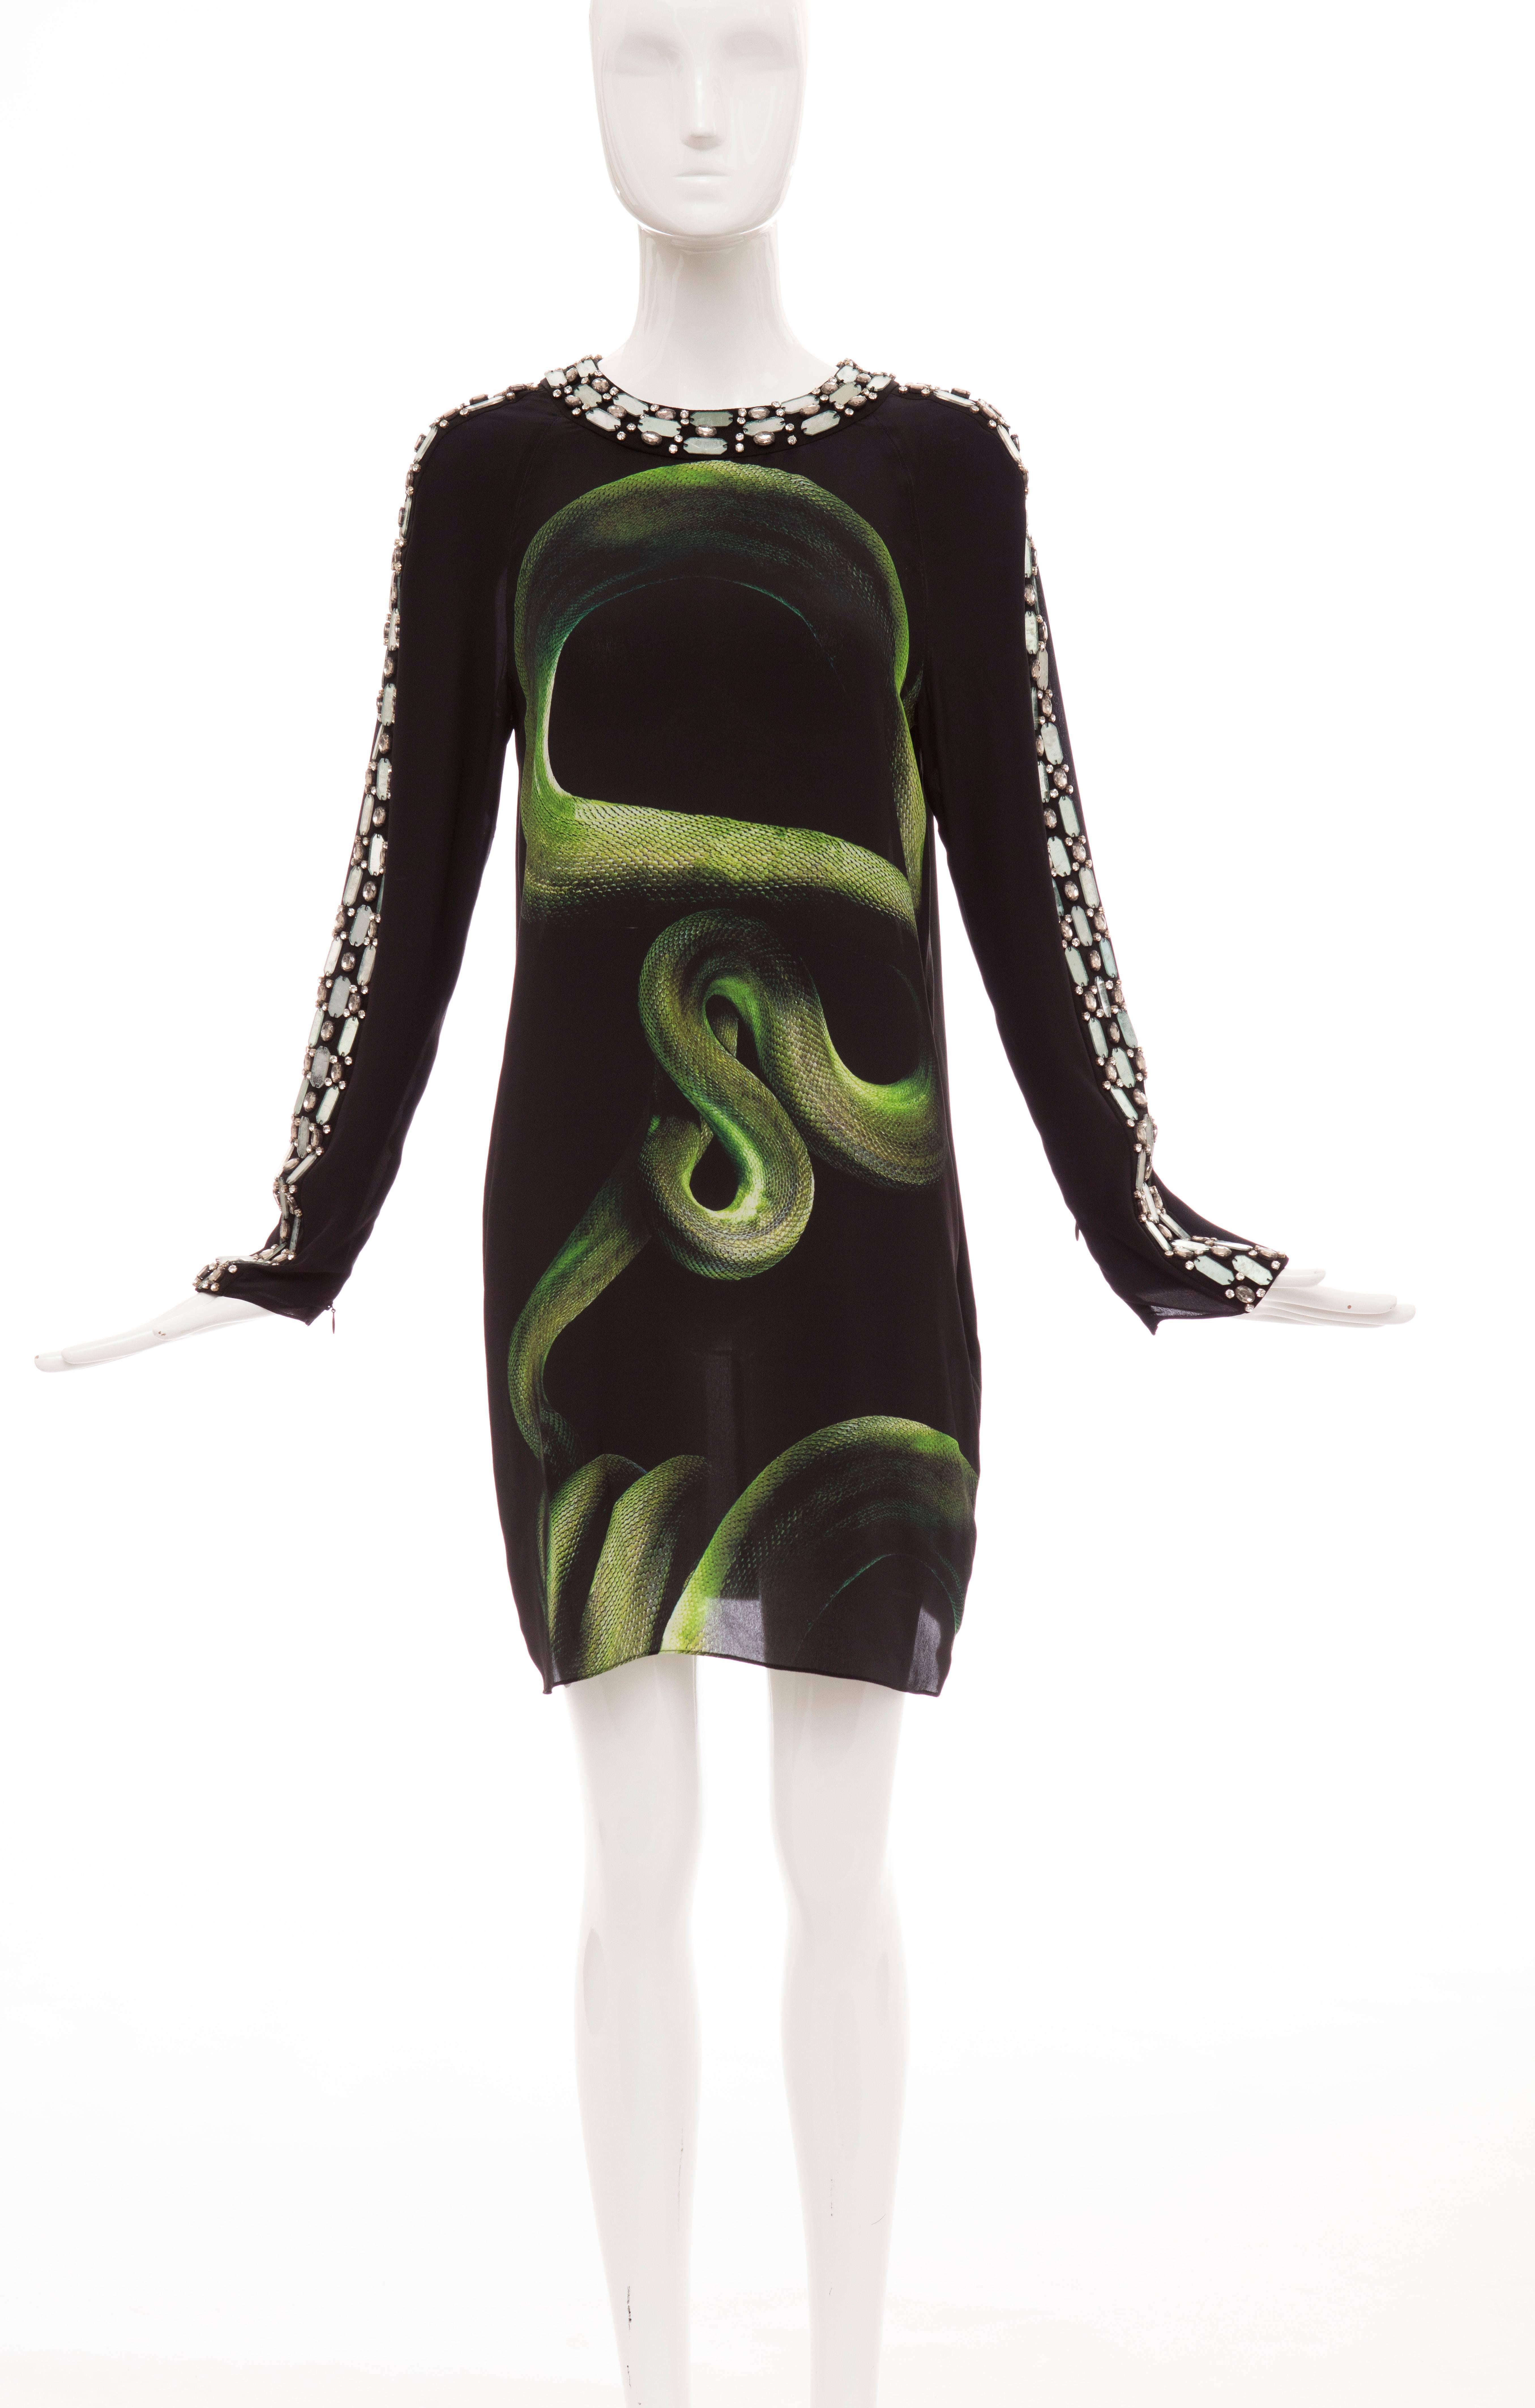 Alber Elbaz for Lanvin, Spring-Summer 2012 black silk shift dress with python print, crystal embellishments at sleeves and dual snap closures at back.

FR. 40
US. 8

Bust 40, Waist 38, Hips 42, Length 36
